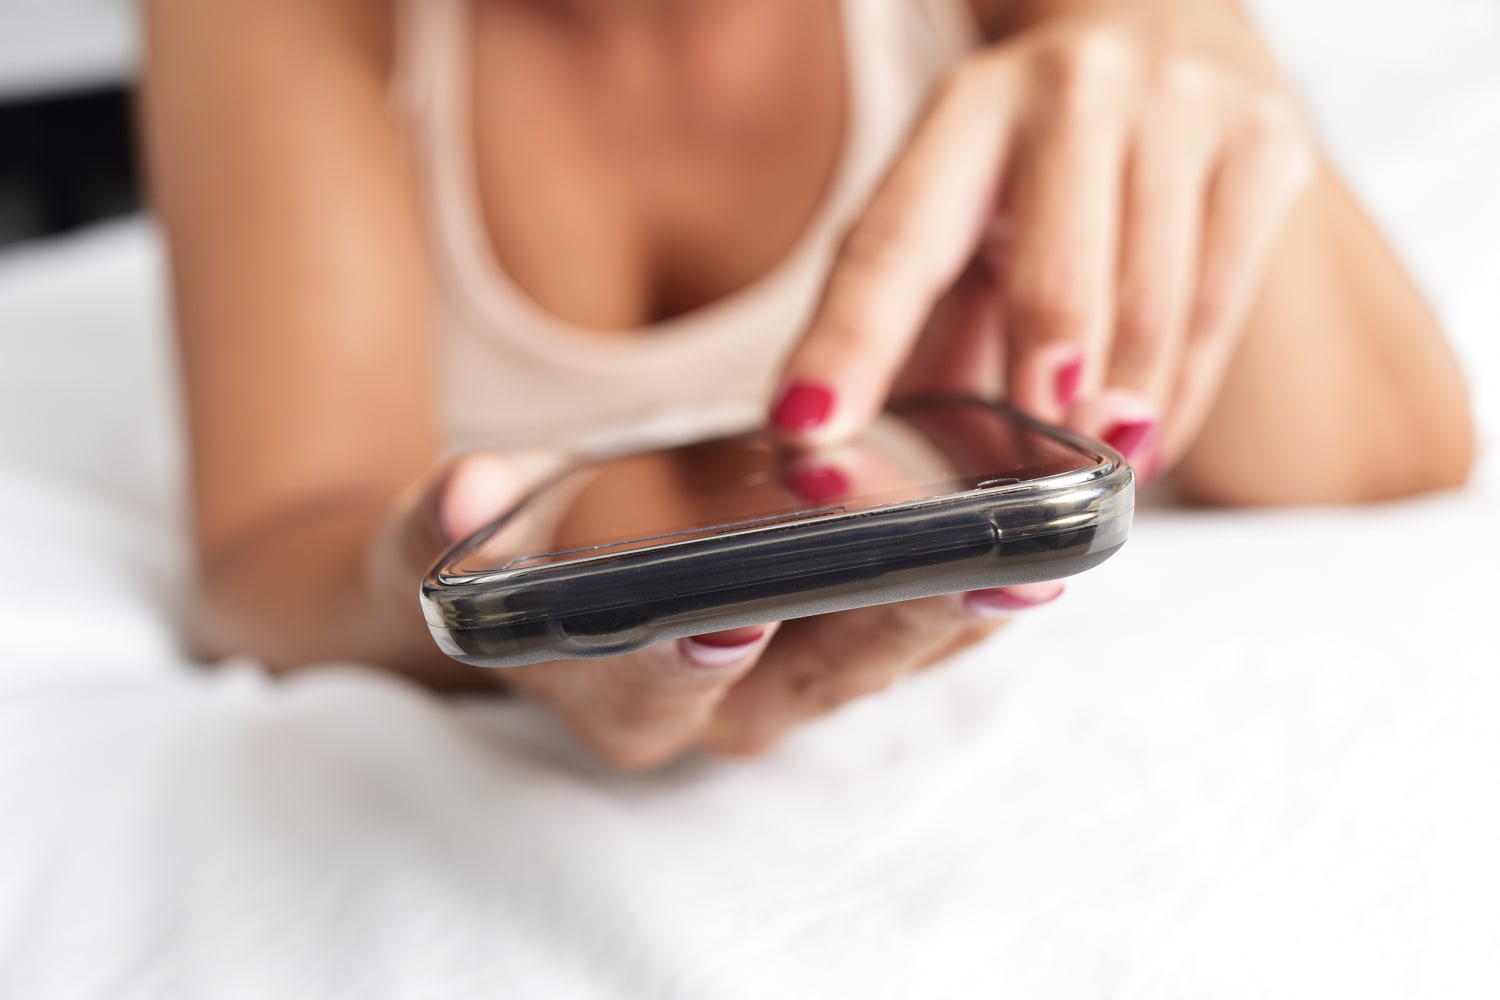 Can You Really Make Money Sexting?